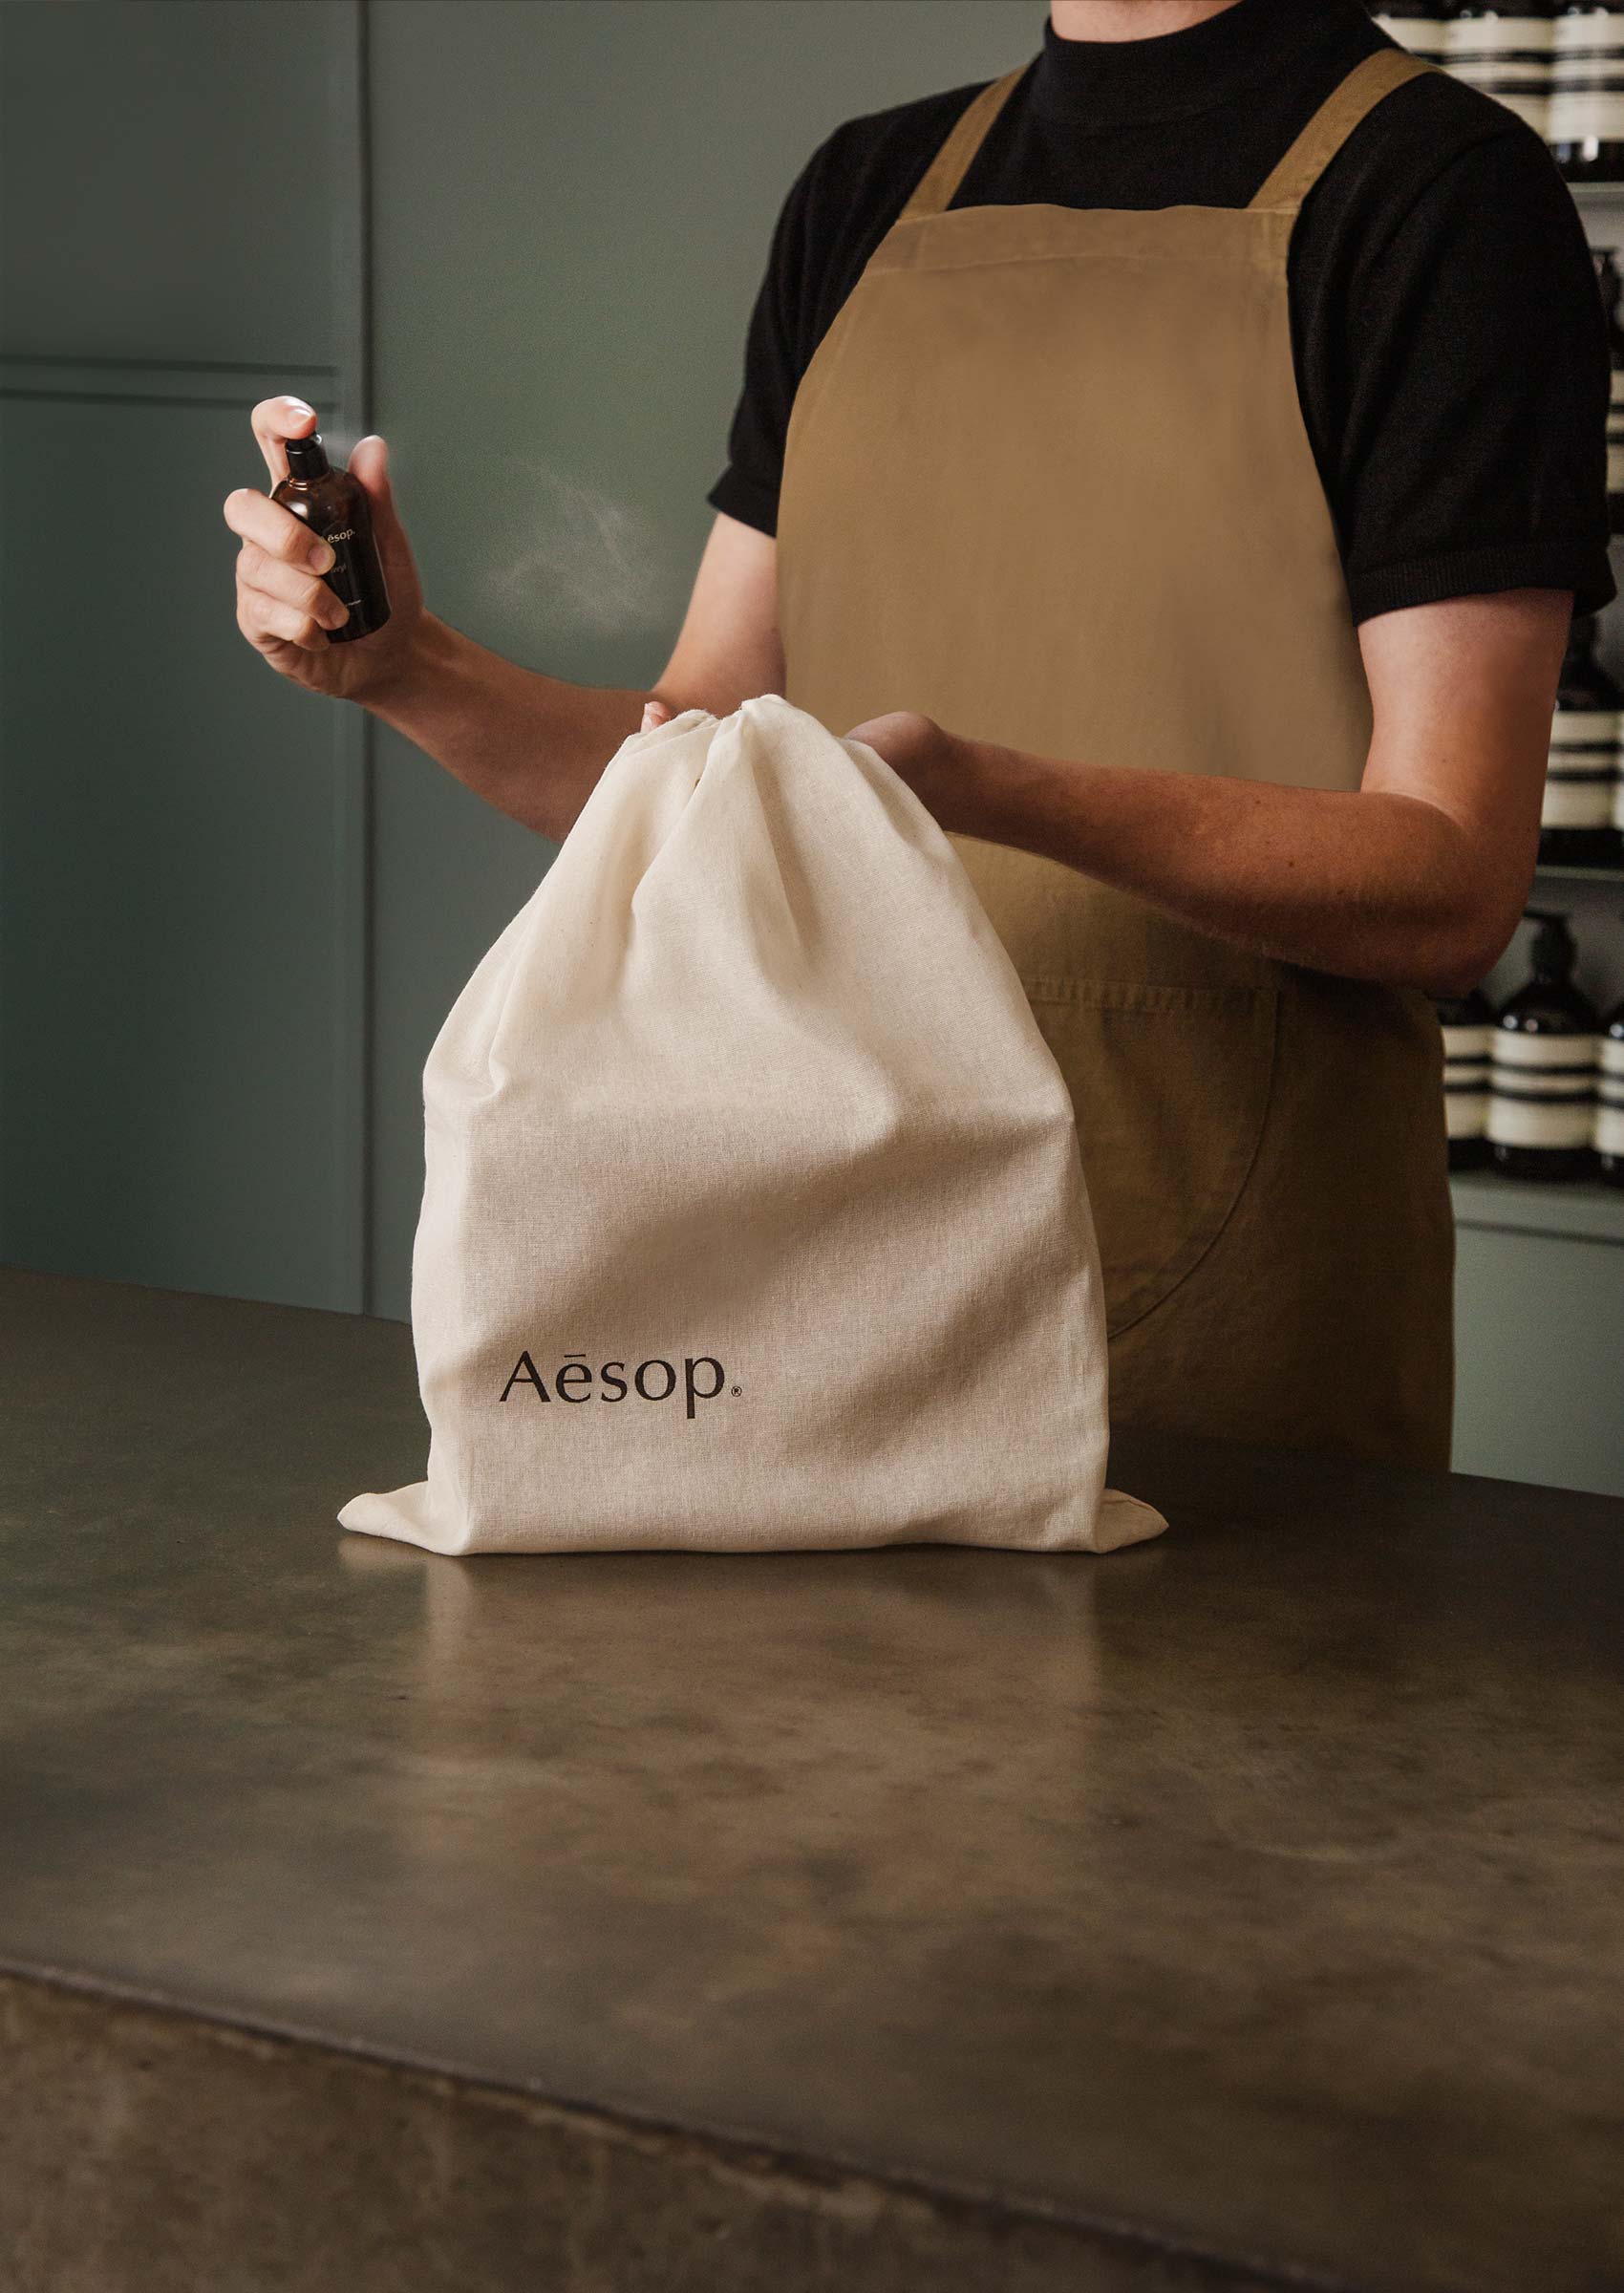 An Aesop consultant spritzing a cotton bag with fragrance.